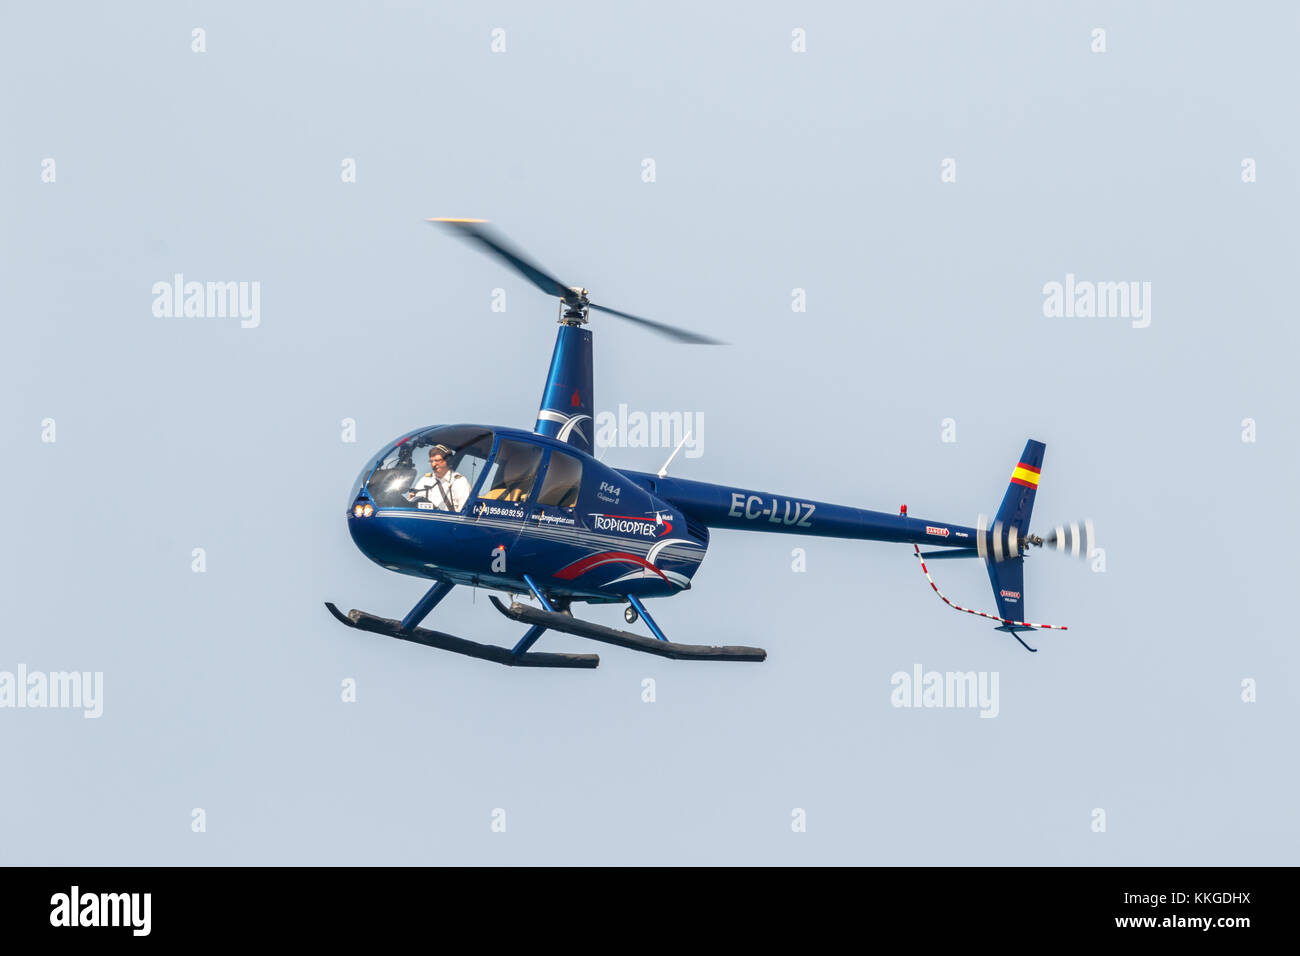 MOTRIL, GRANADA, SPAIN-JUN 11: Helicopter Robinson R44 taking part in an exhibition on the 12th international airshow of Motril on Jun 11, 2017, in Mo Stock Photo